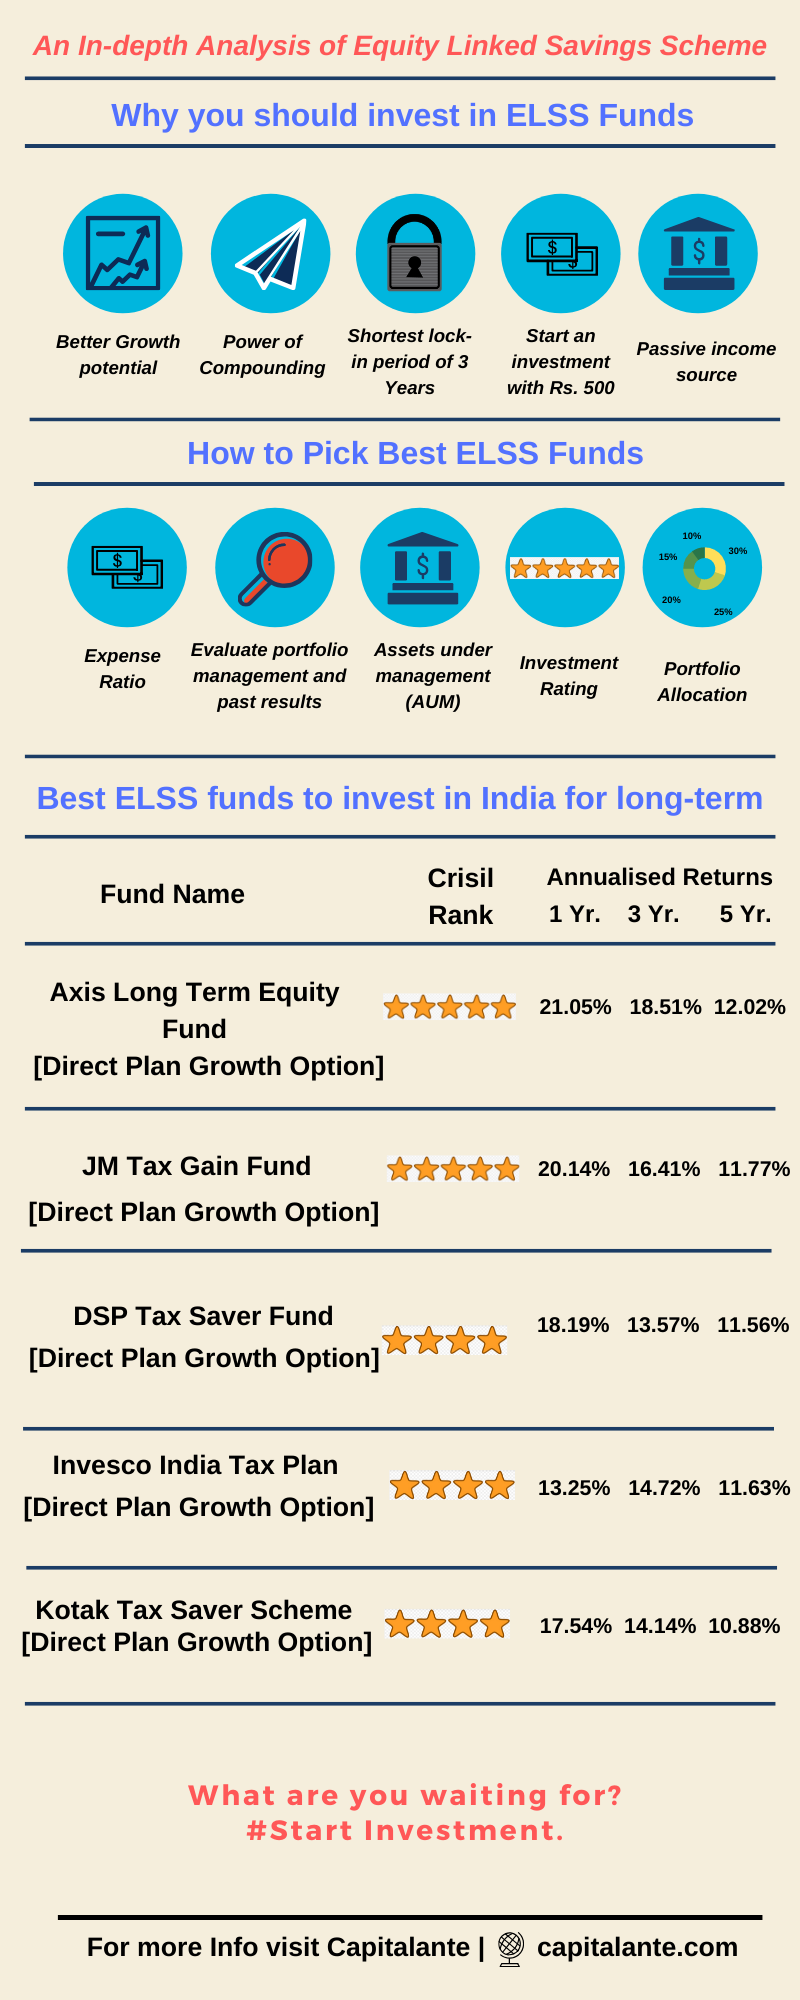 Best ELSS funds to invest in India